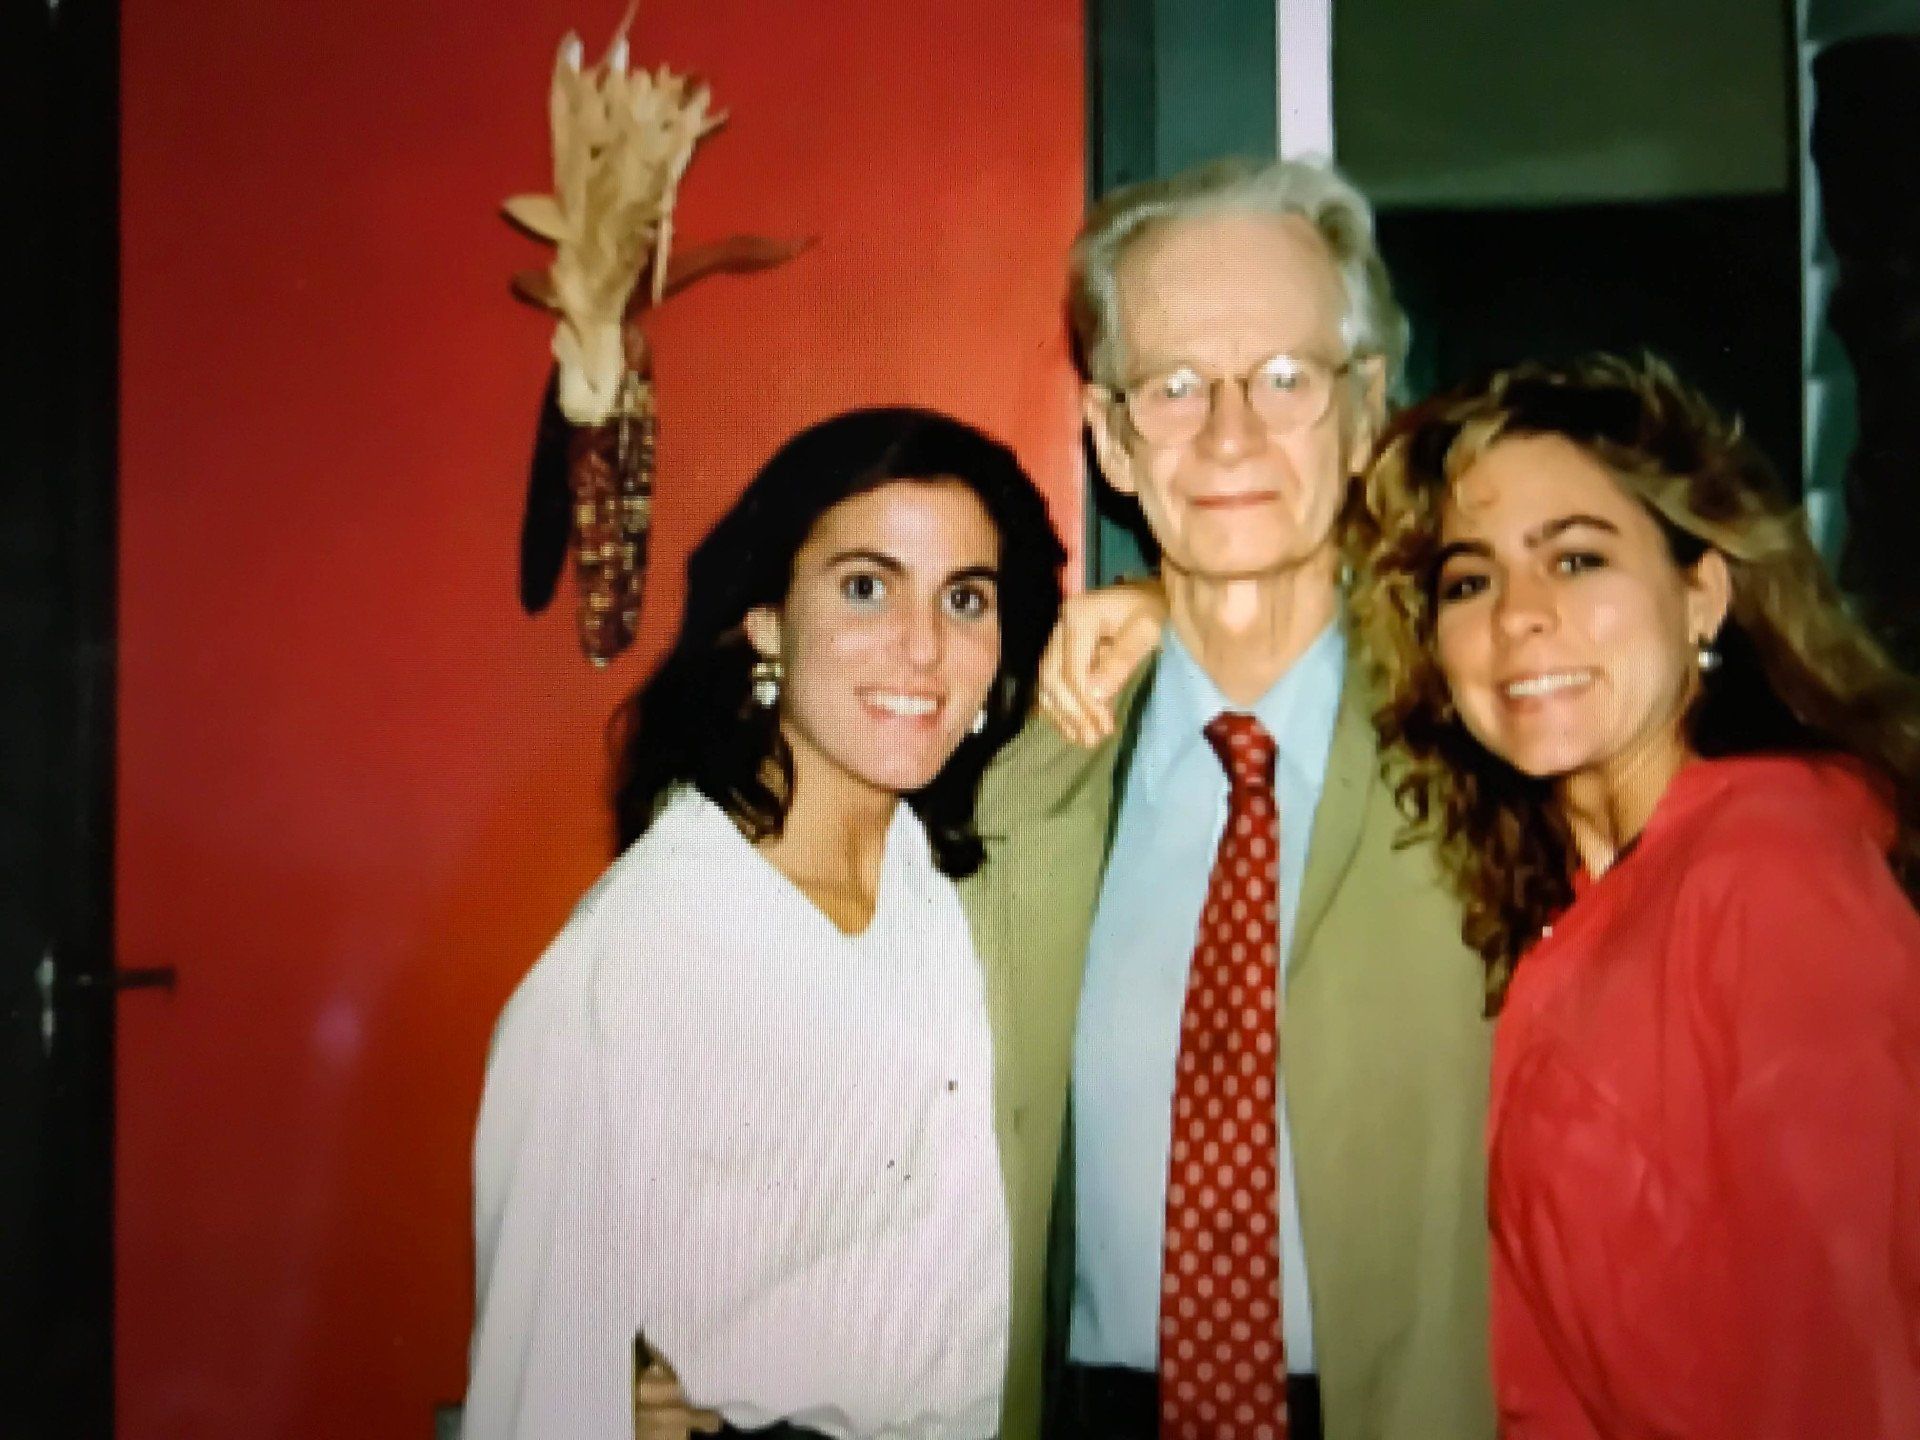 Dr. Beth Frates with B. F. Skinner, the world-renowned American psychologist, behaviorist, author, inventor, and social philosopher.